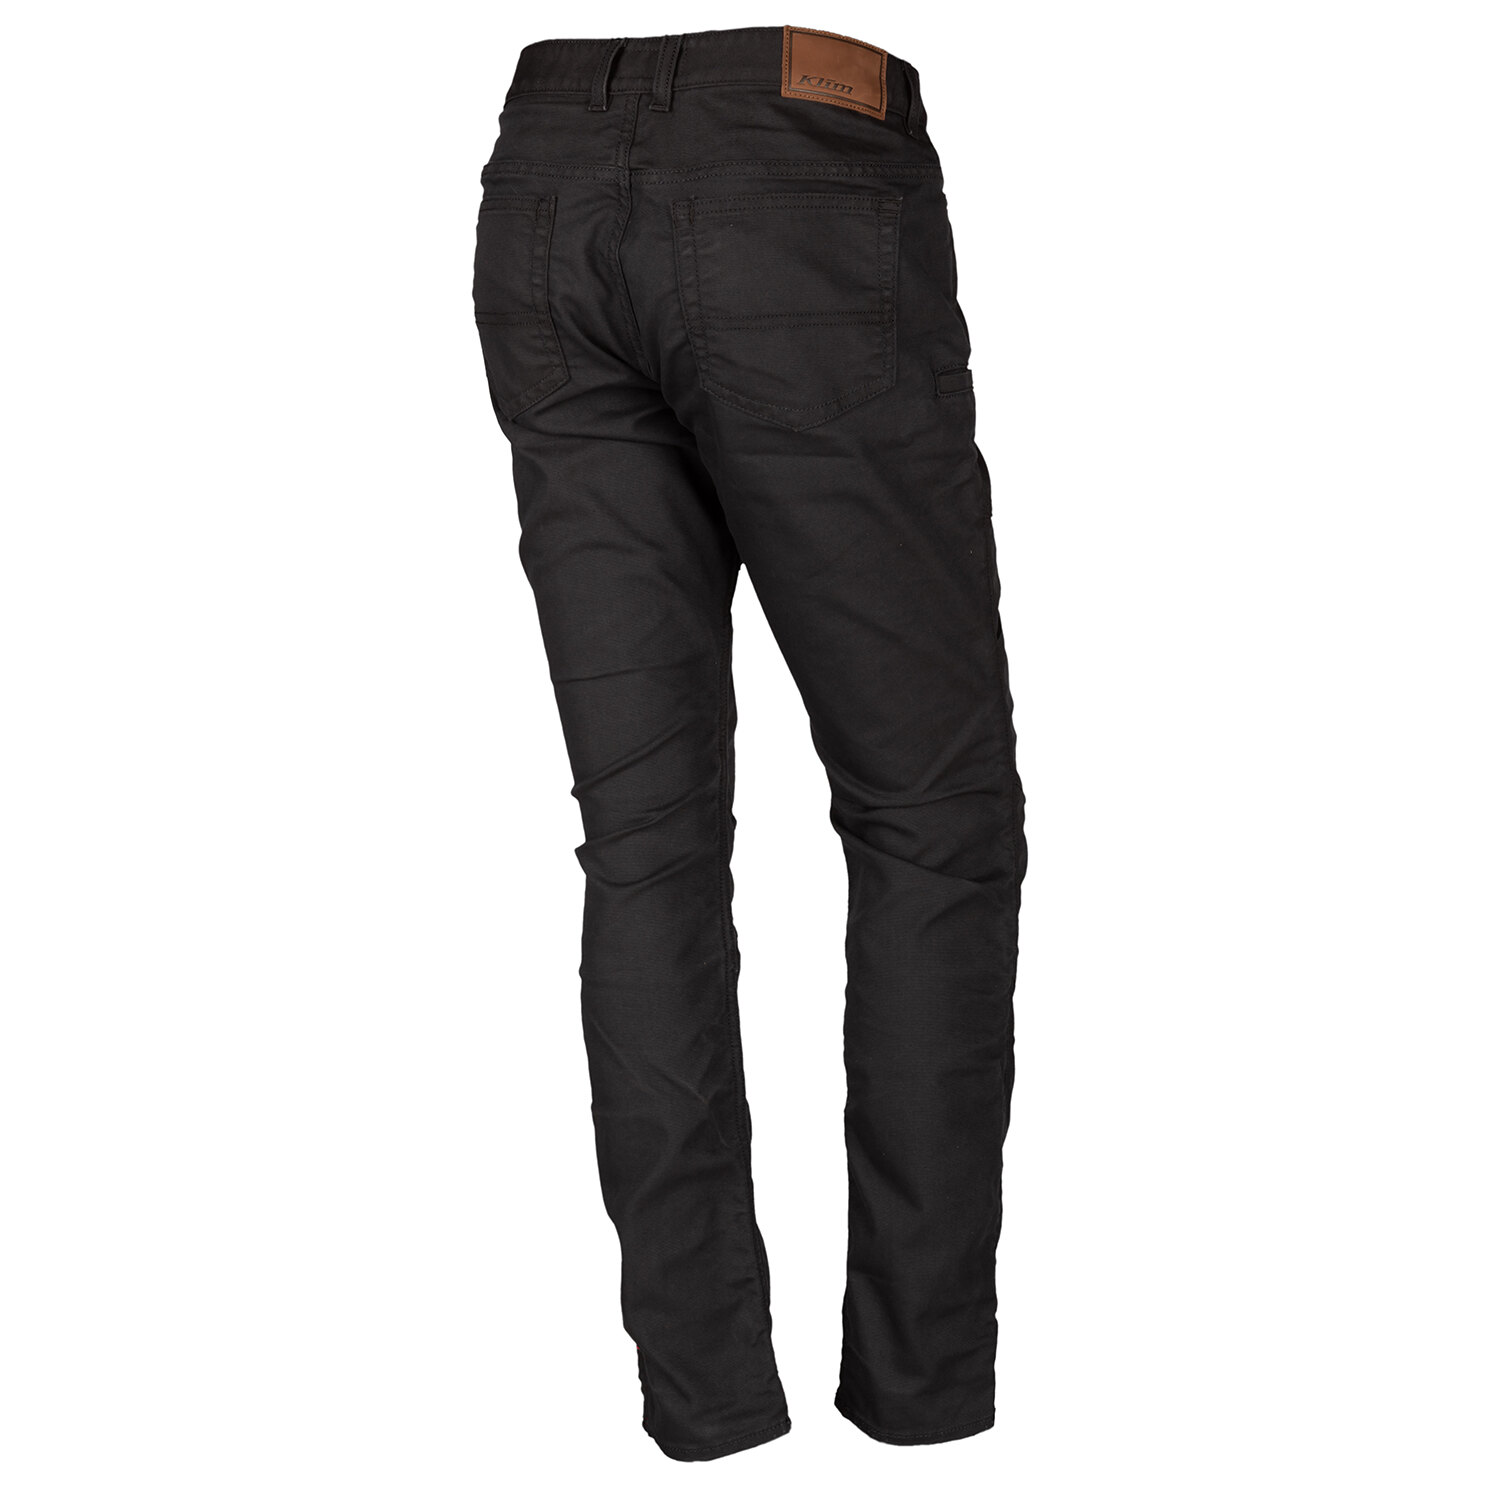 Women's Outrider Pant Black